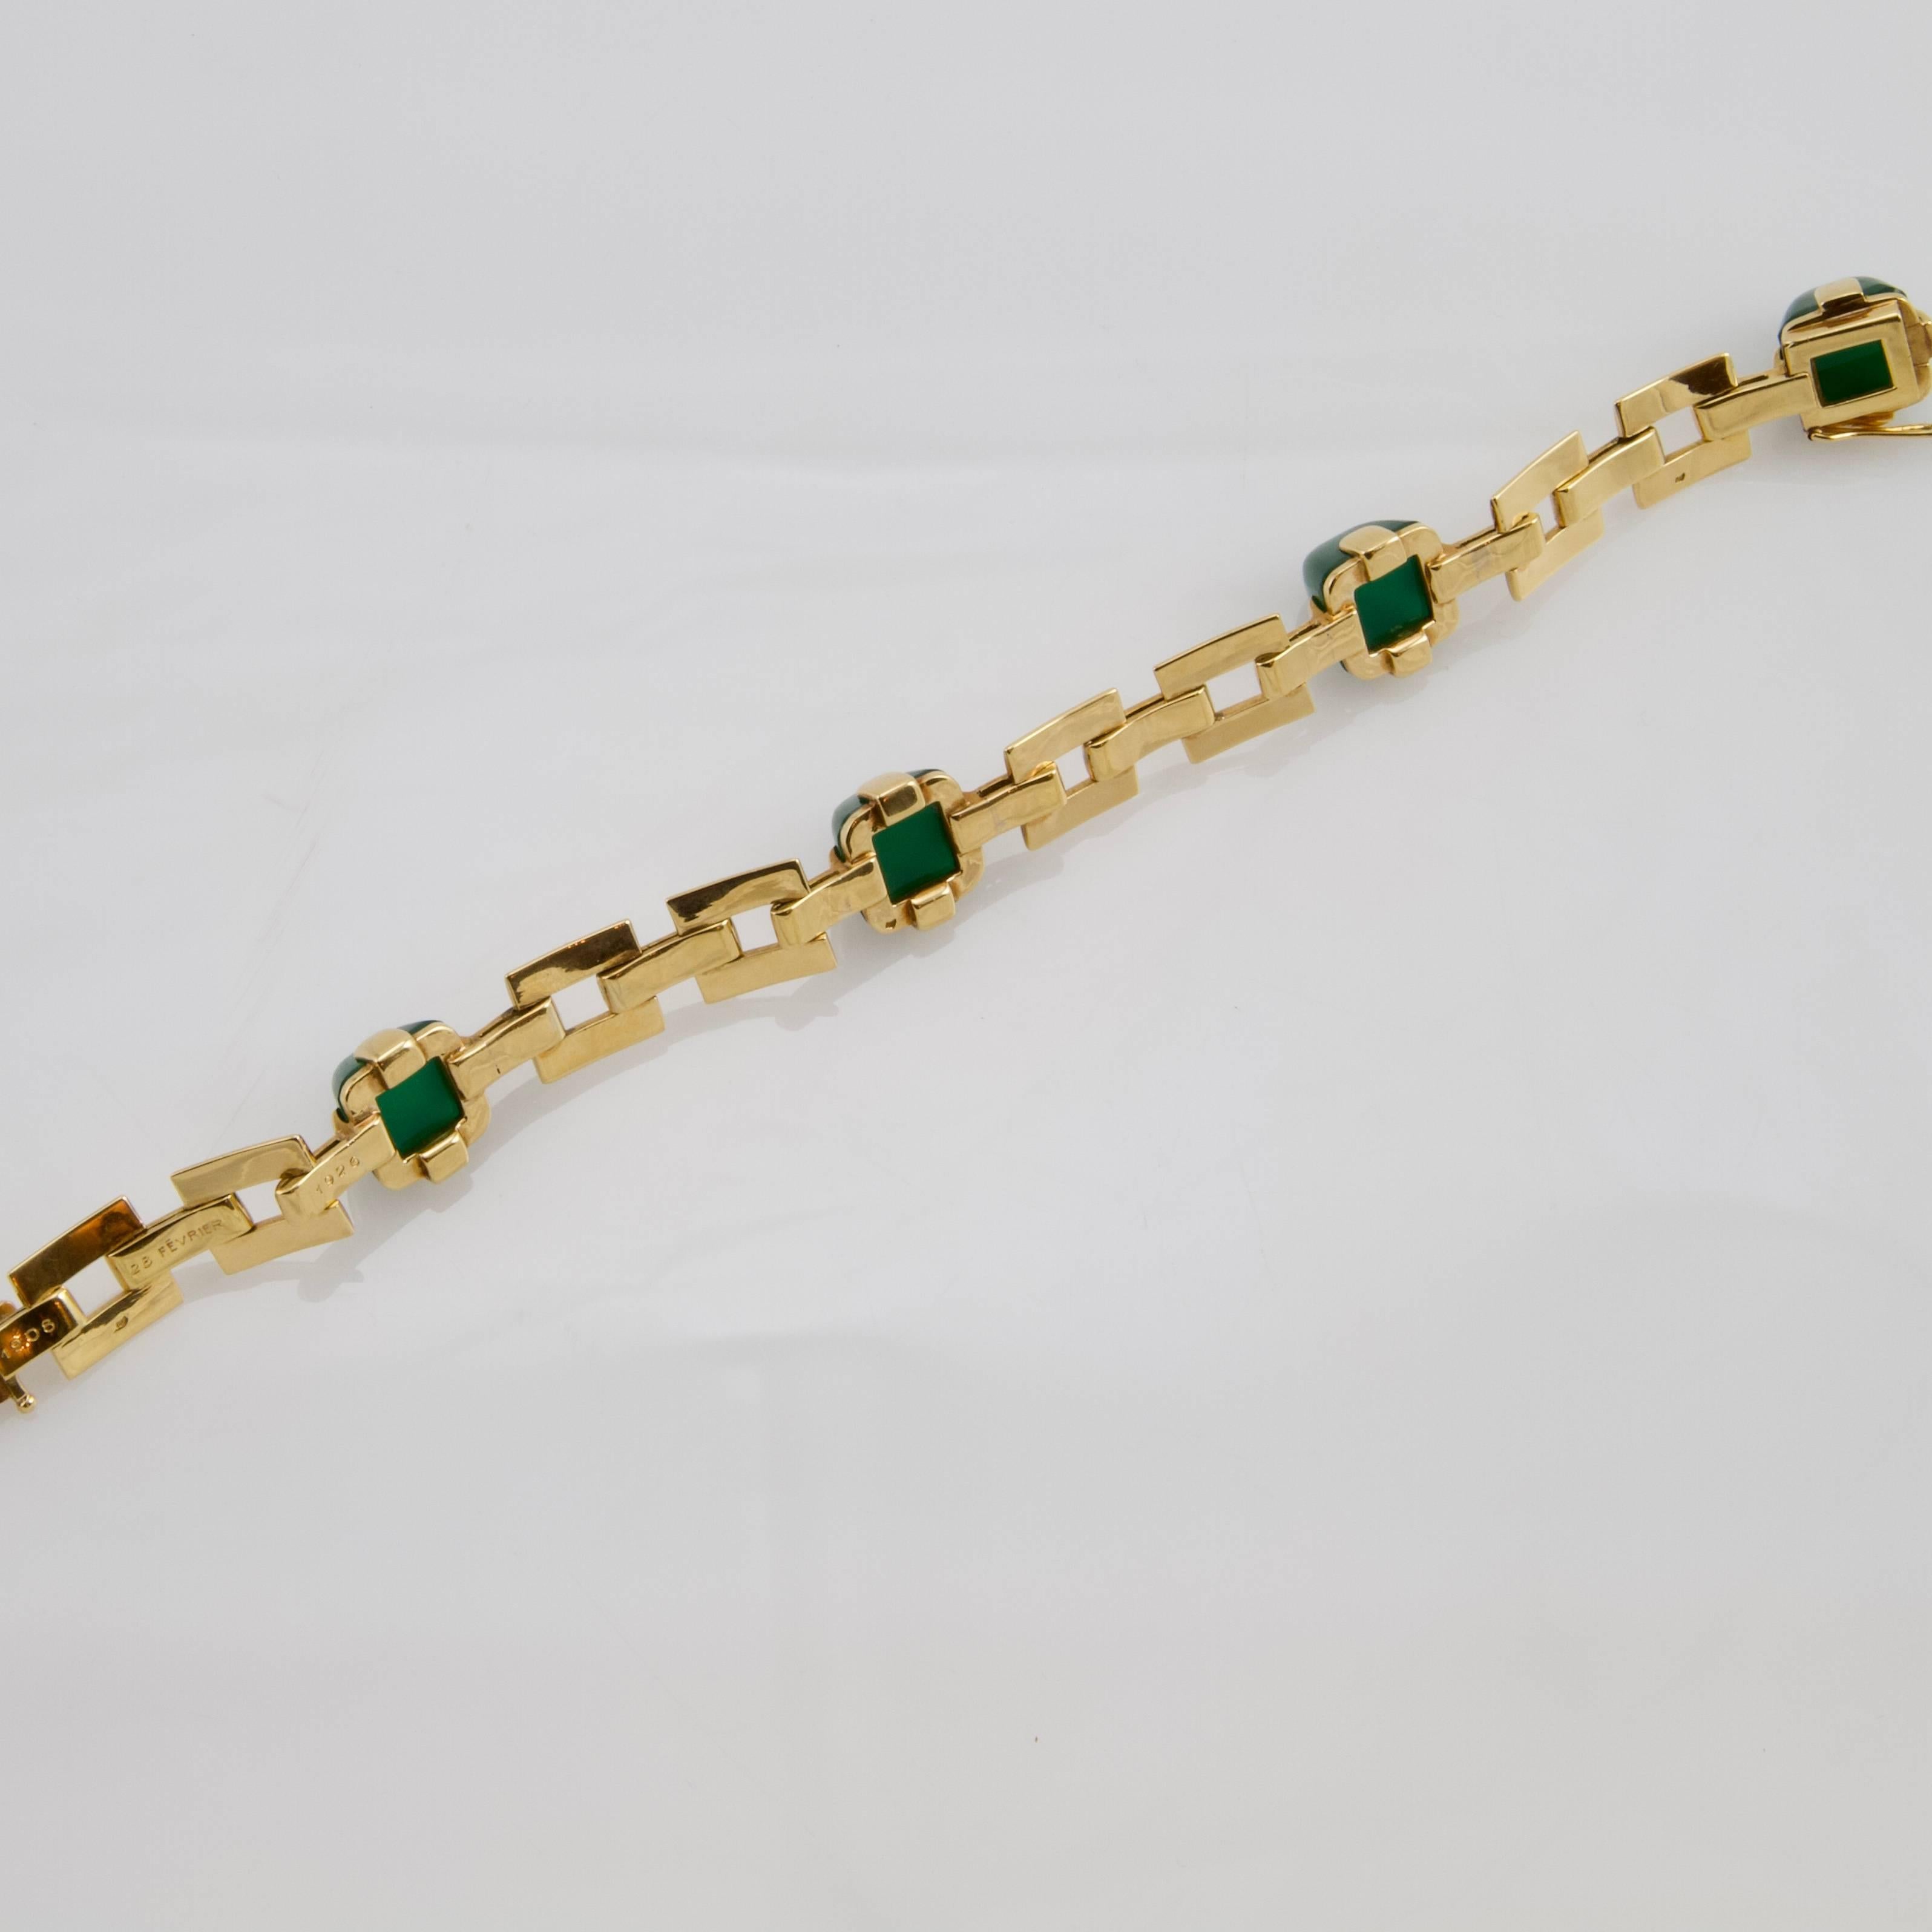 A very amazing art deco in yellow gold...bracelet adorned with four green chalcedony cabochon. Yellow gold is burnished, extremely dense and soft as silk. Under, inscription engraved 